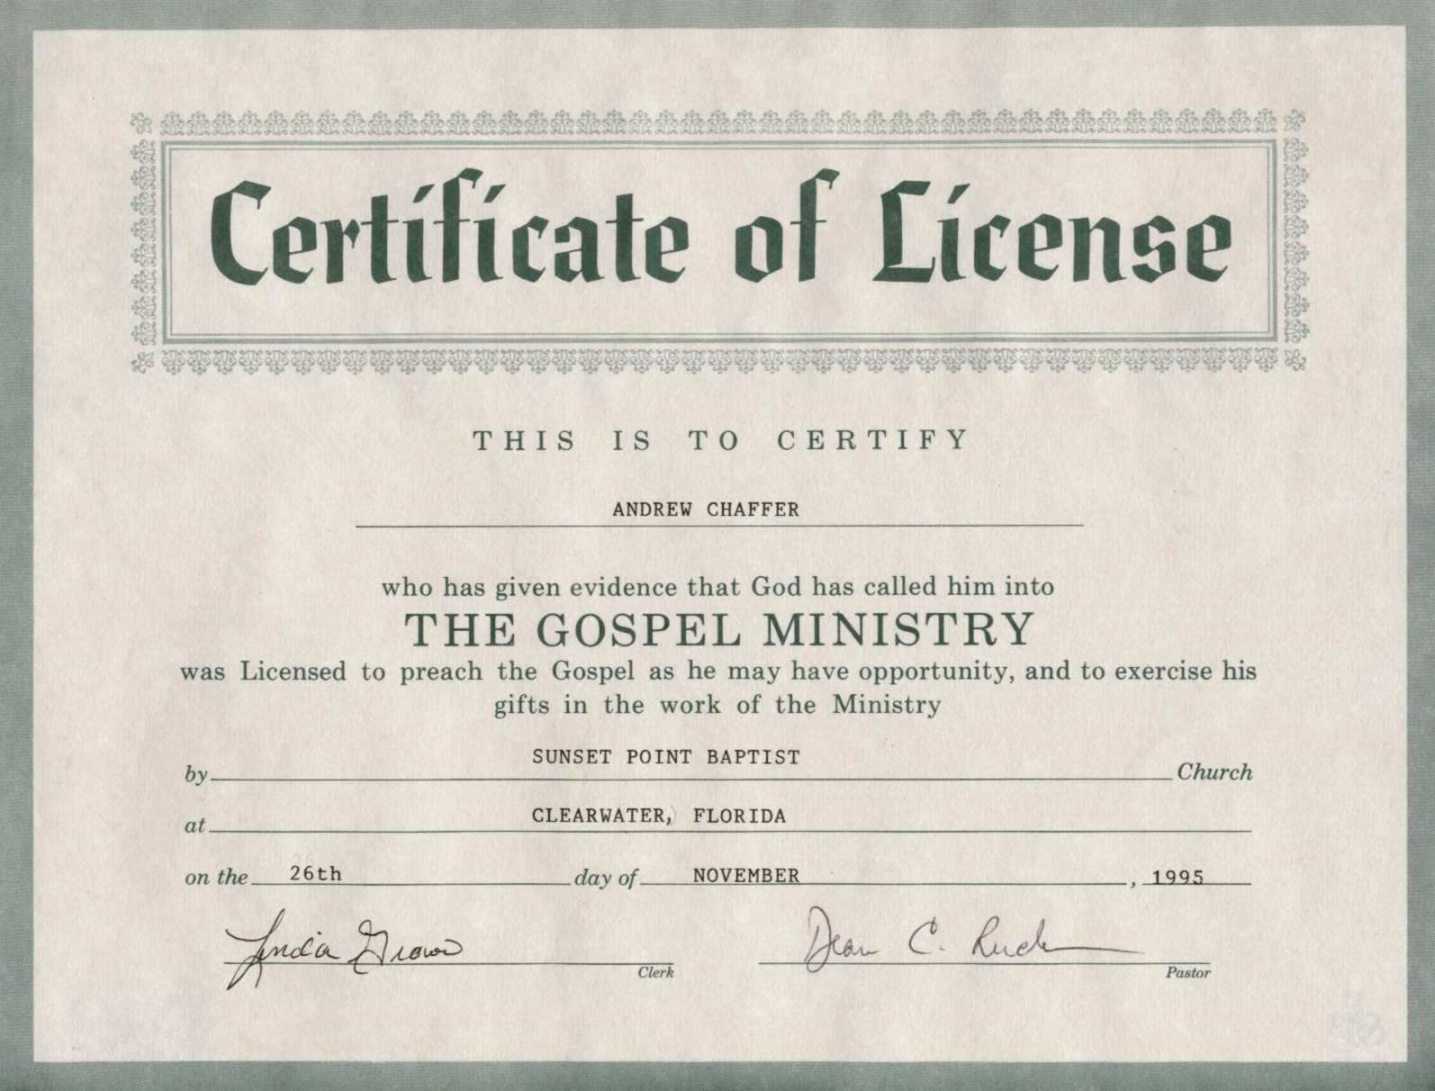 Exceptional Printable Ordination Certificate | Dan's Blog With Regard To Free Ordination Certificate Template